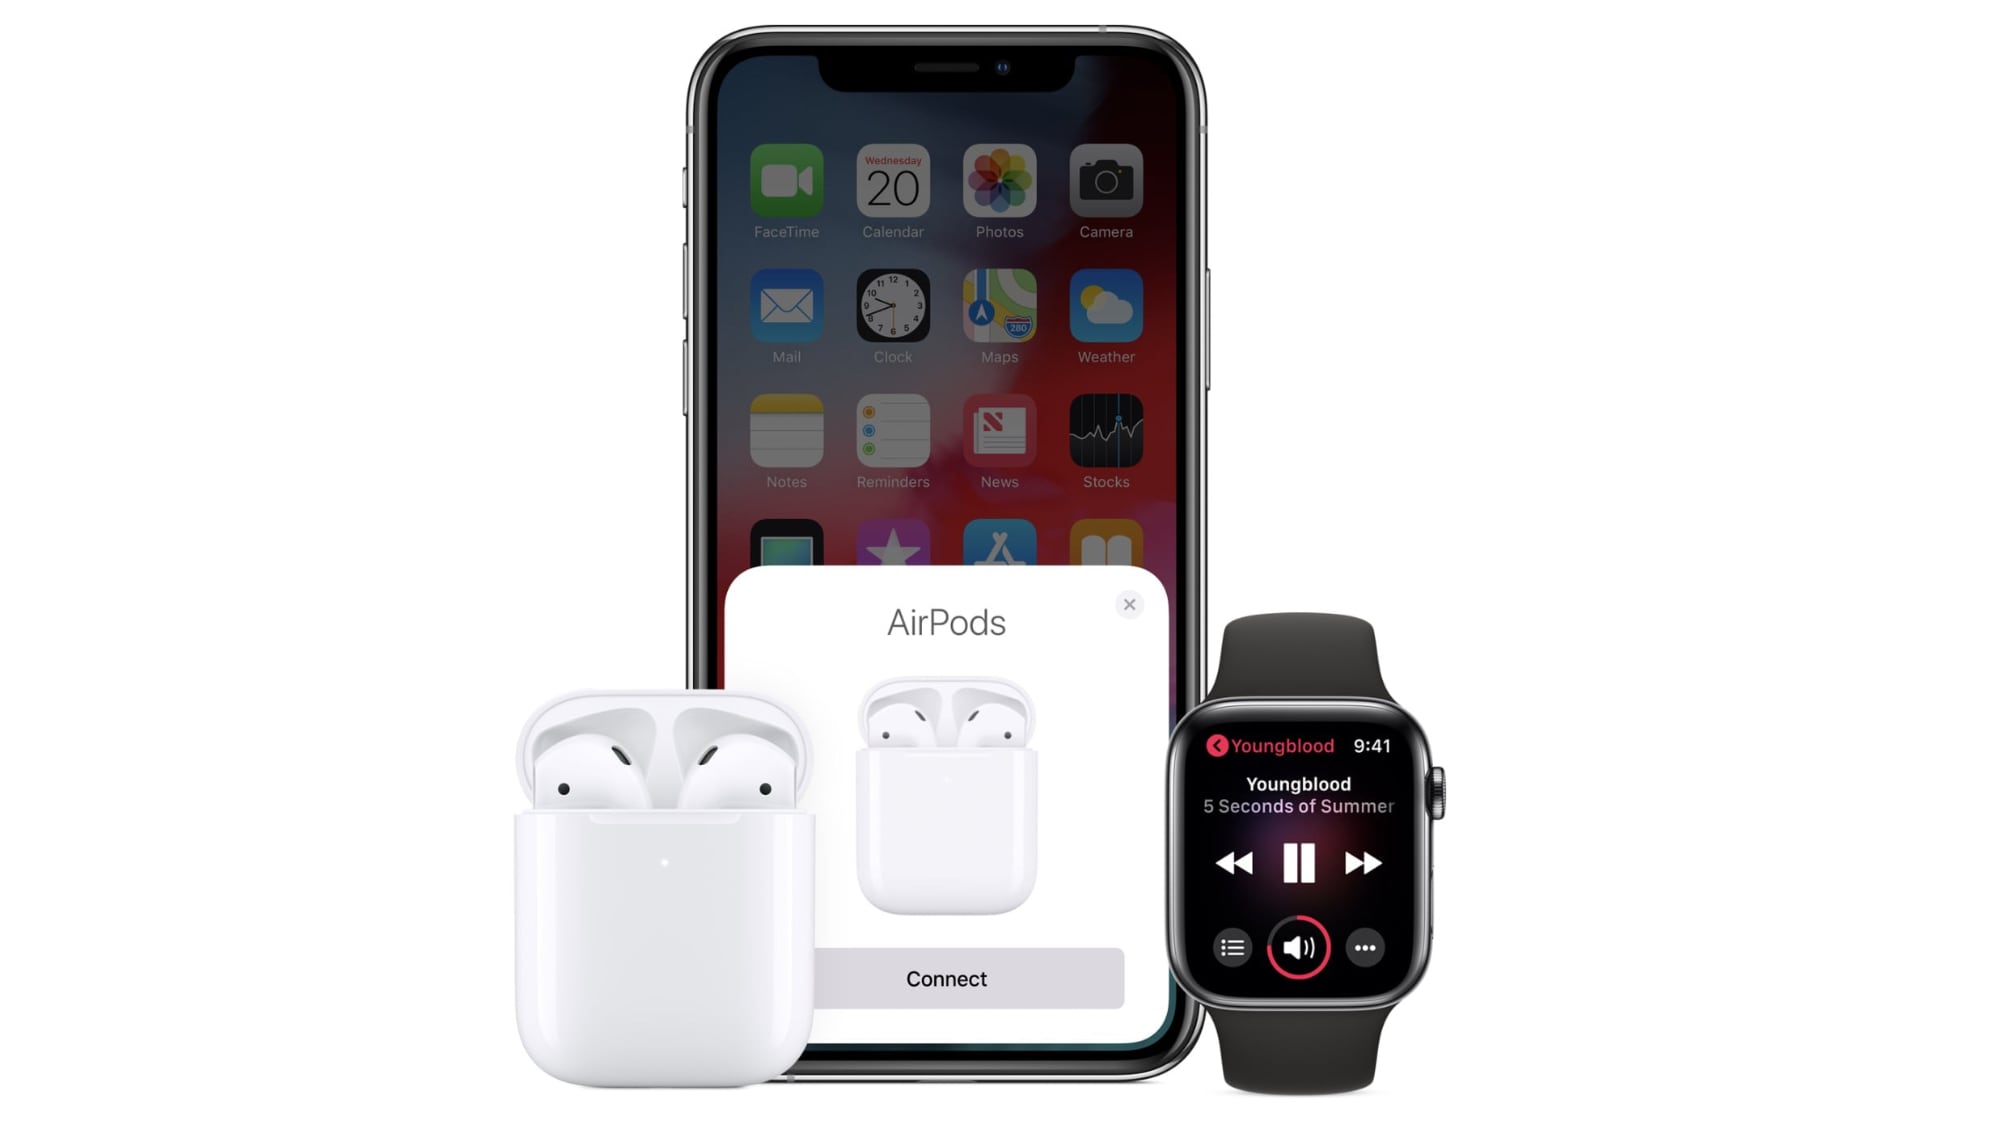 AirPods 2 Brings Hey Siri Support, H1 Chip, and Wireless Charging